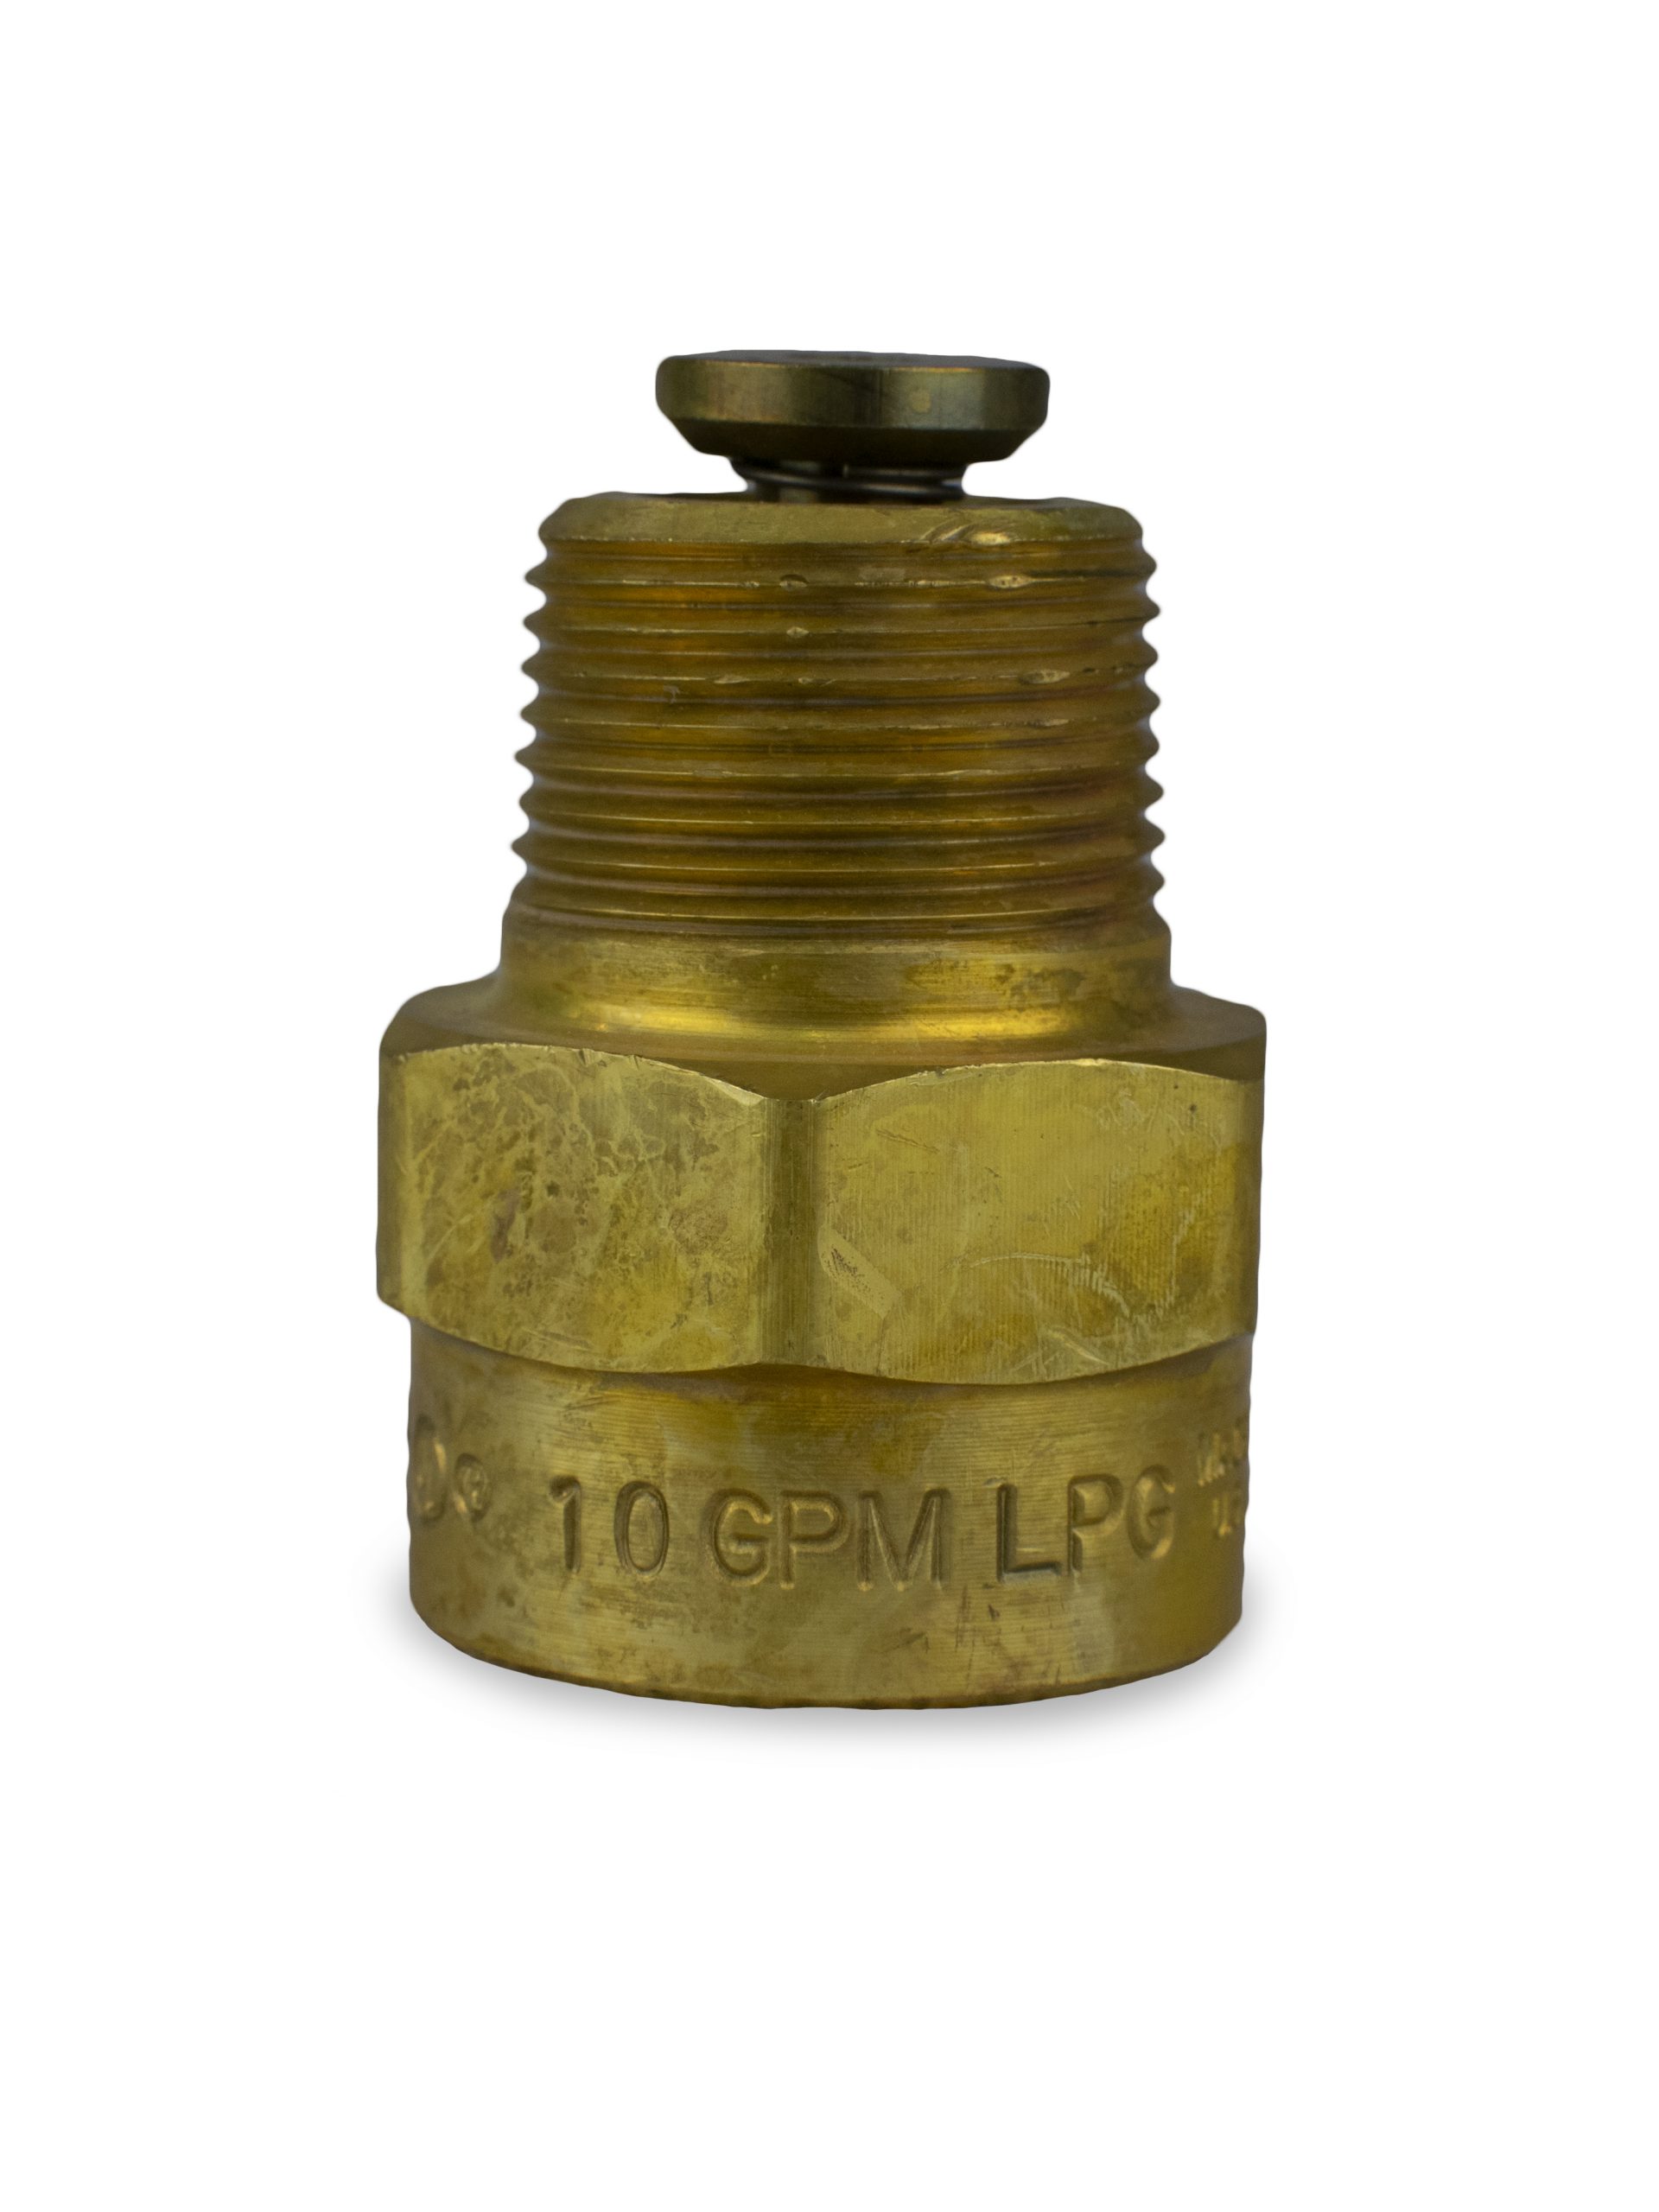 EXCESS FLOW VALVE 3/4 Inches BRASS 10GPM